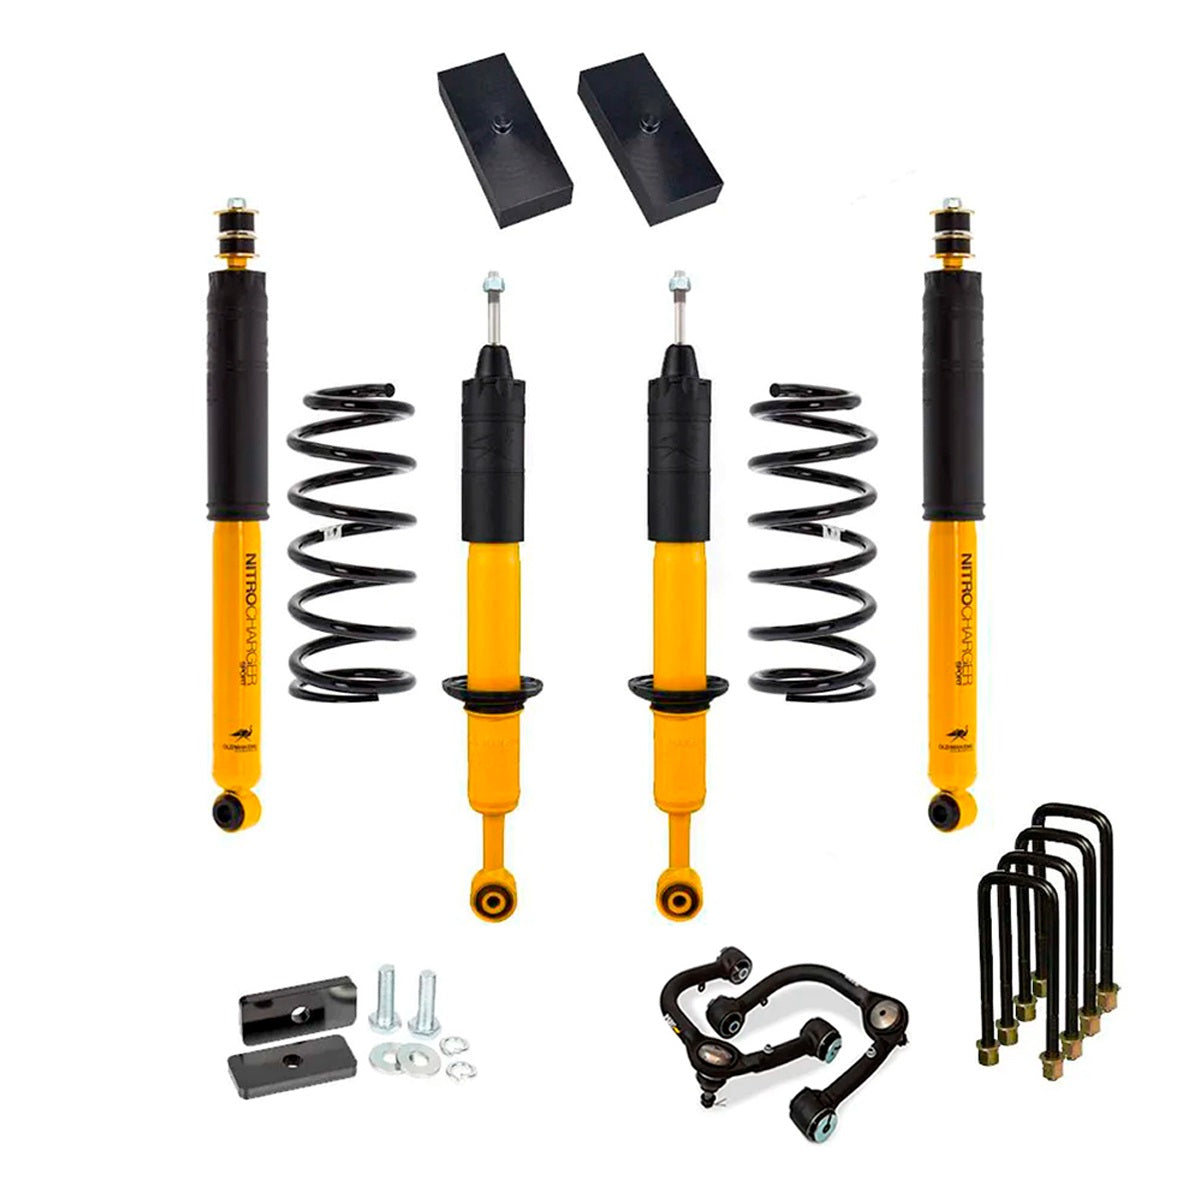 OME 2.5 inch Essentials Lift Kit Tacoma (05-15) - Front Shocks Assembly